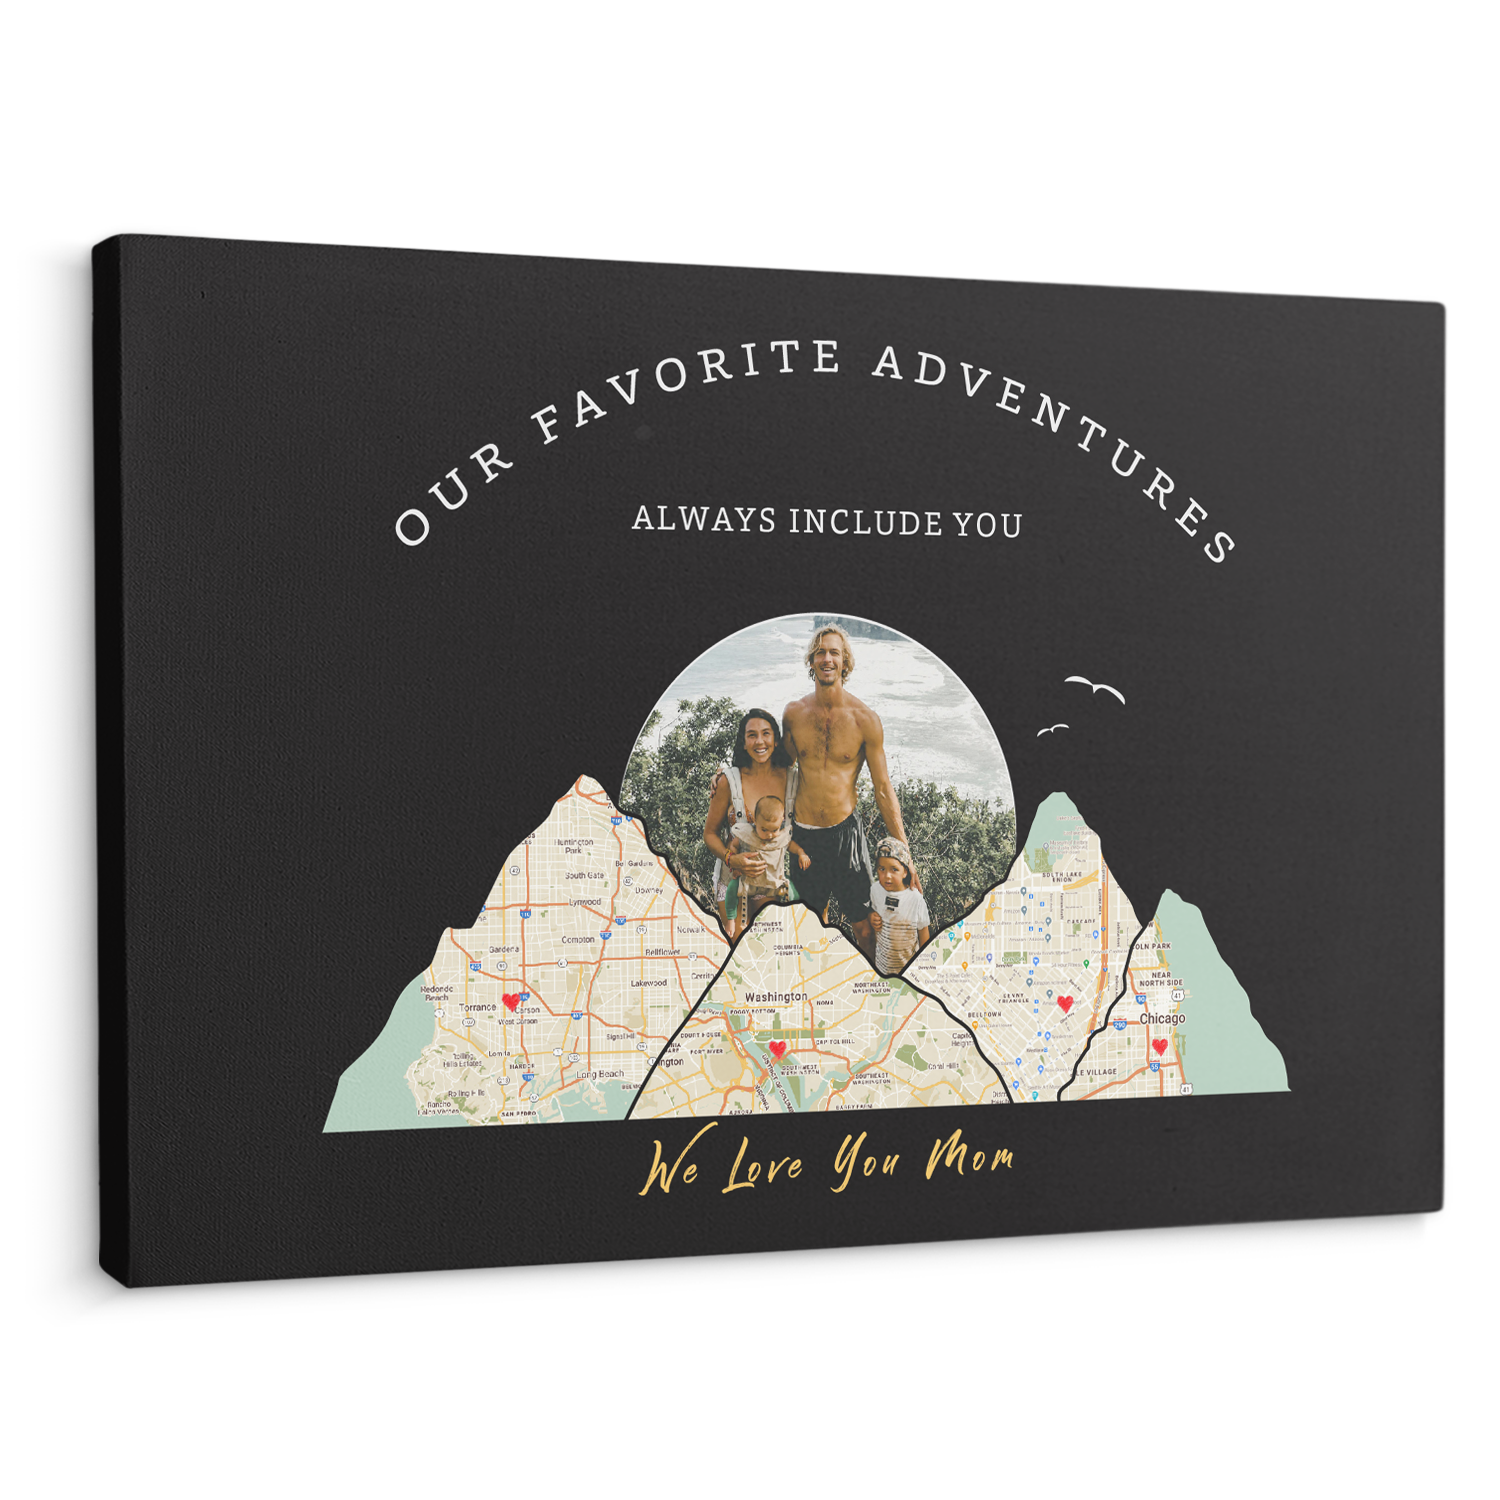 Our Favorite Adventures Always Include You, Custom Travel Map, Customizable Map Print And Photo, Canvas Wall Art